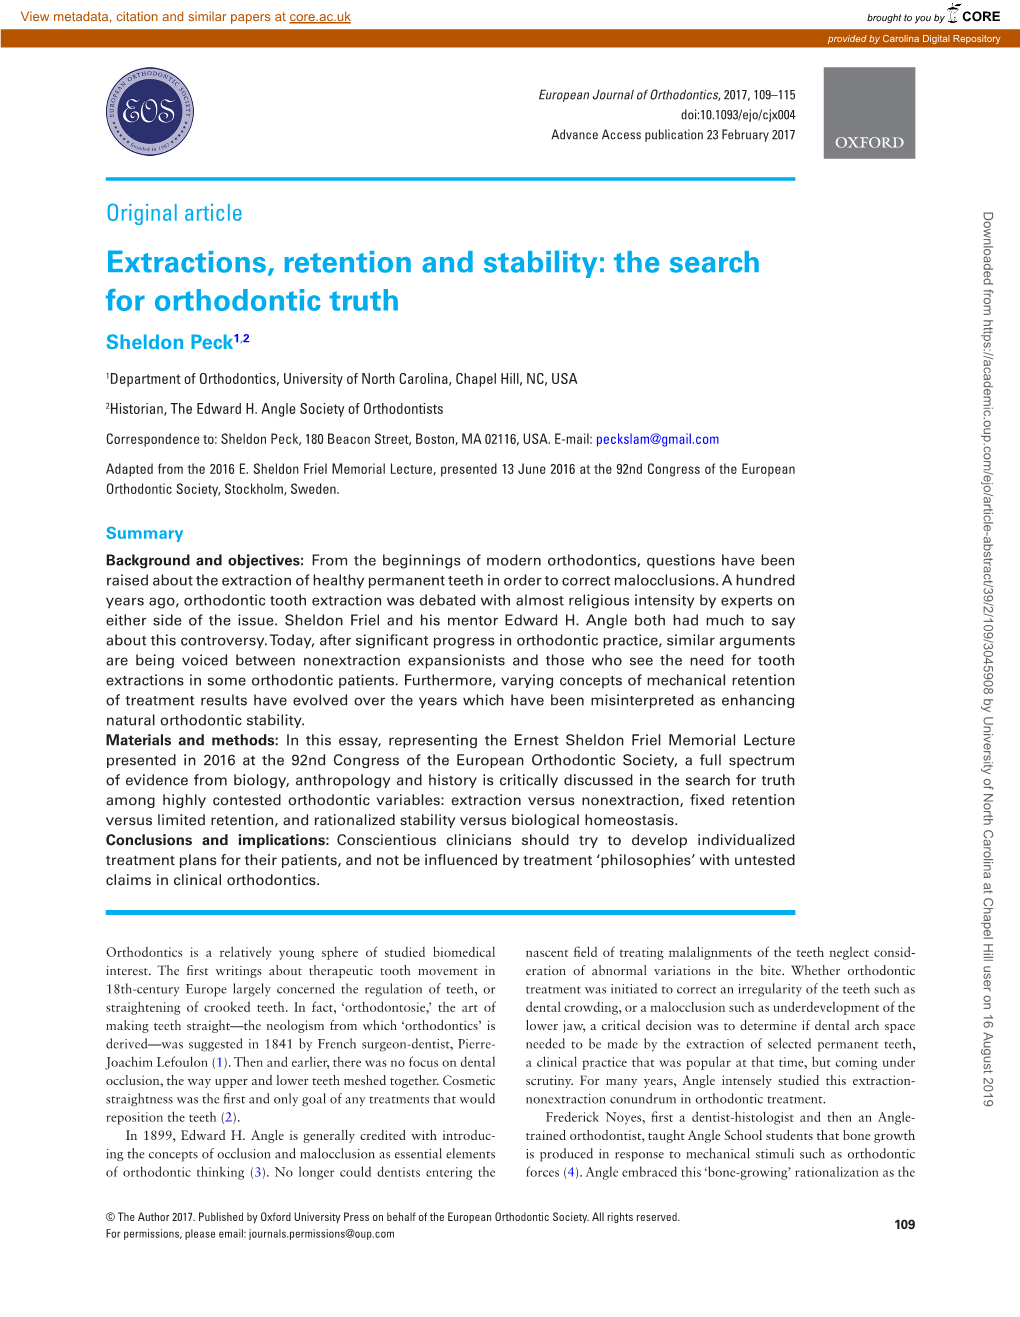 Extractions, Retention and Stability: the Search for Orthodontic Truth Sheldon Peck1,2